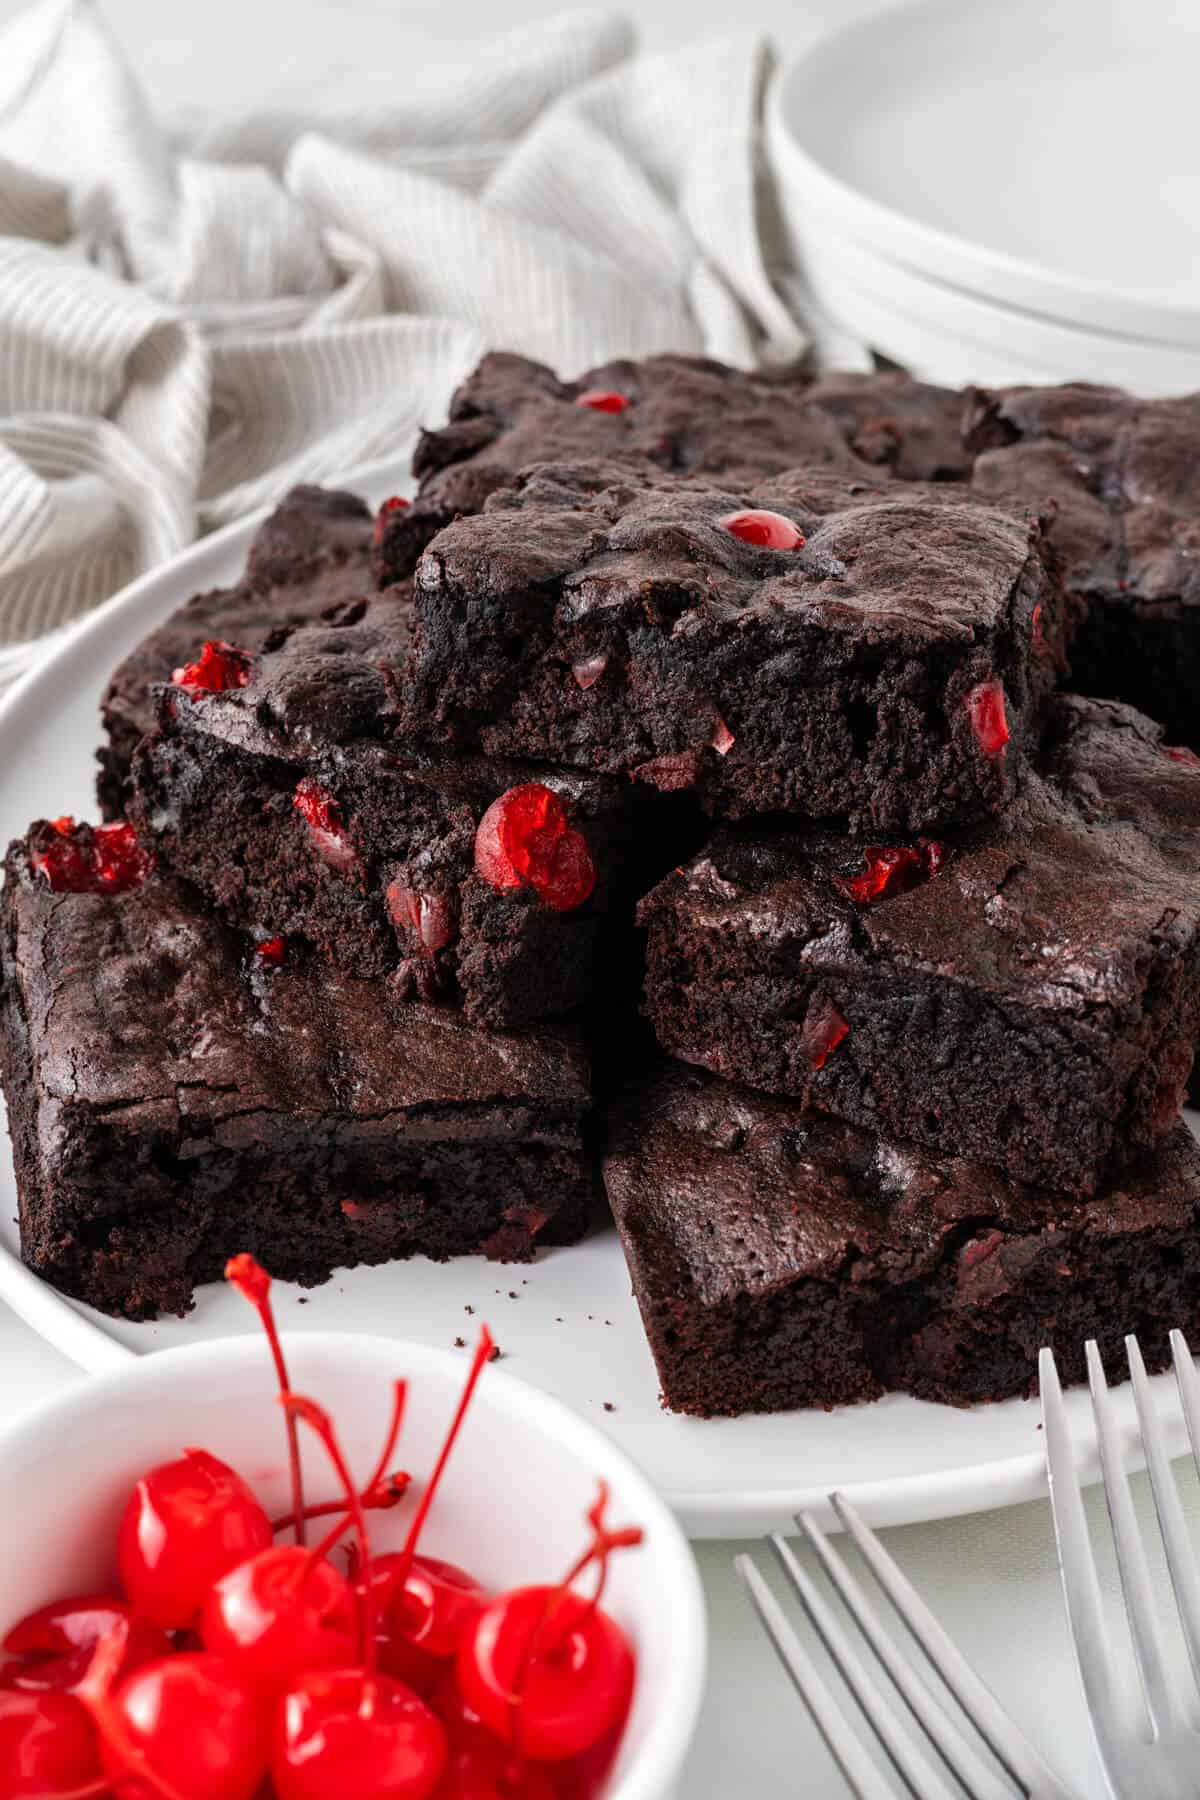 A plate of cherry chocolate brownies.